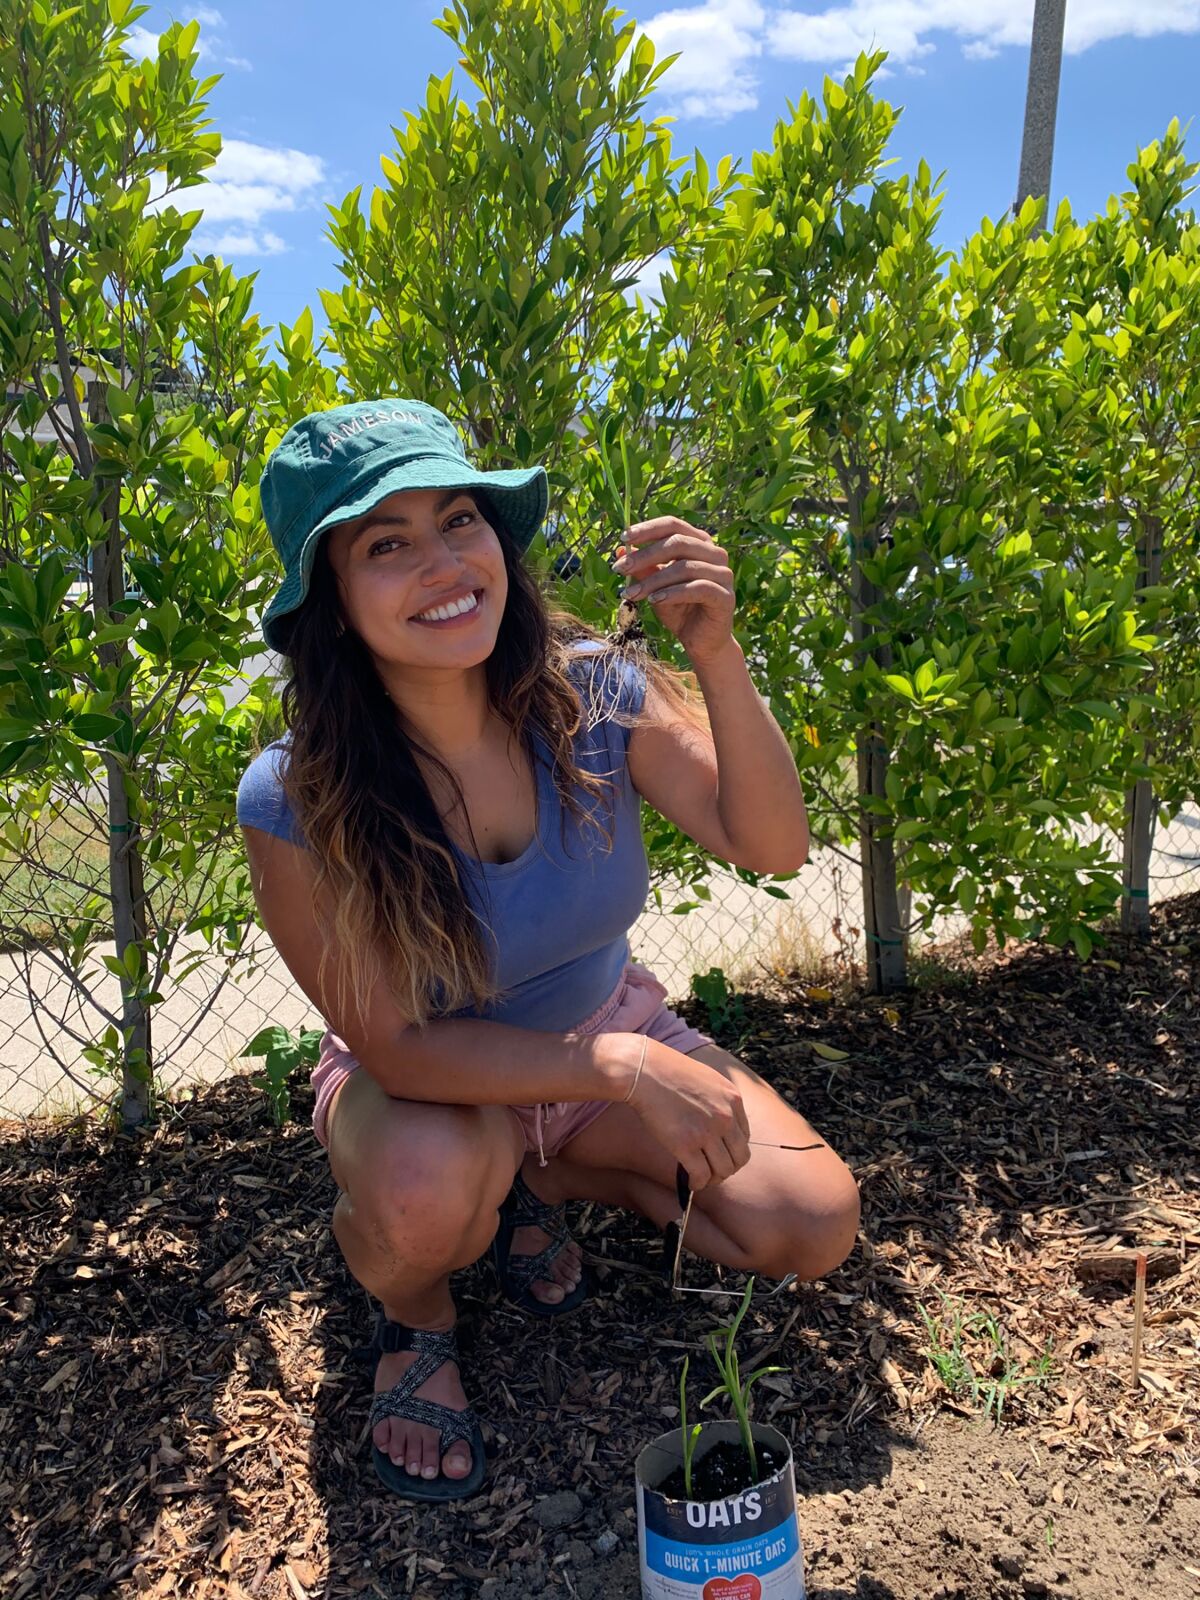 With promotional events on pause, Christina Jimenez has been filling her time growing food for the less fortunate.